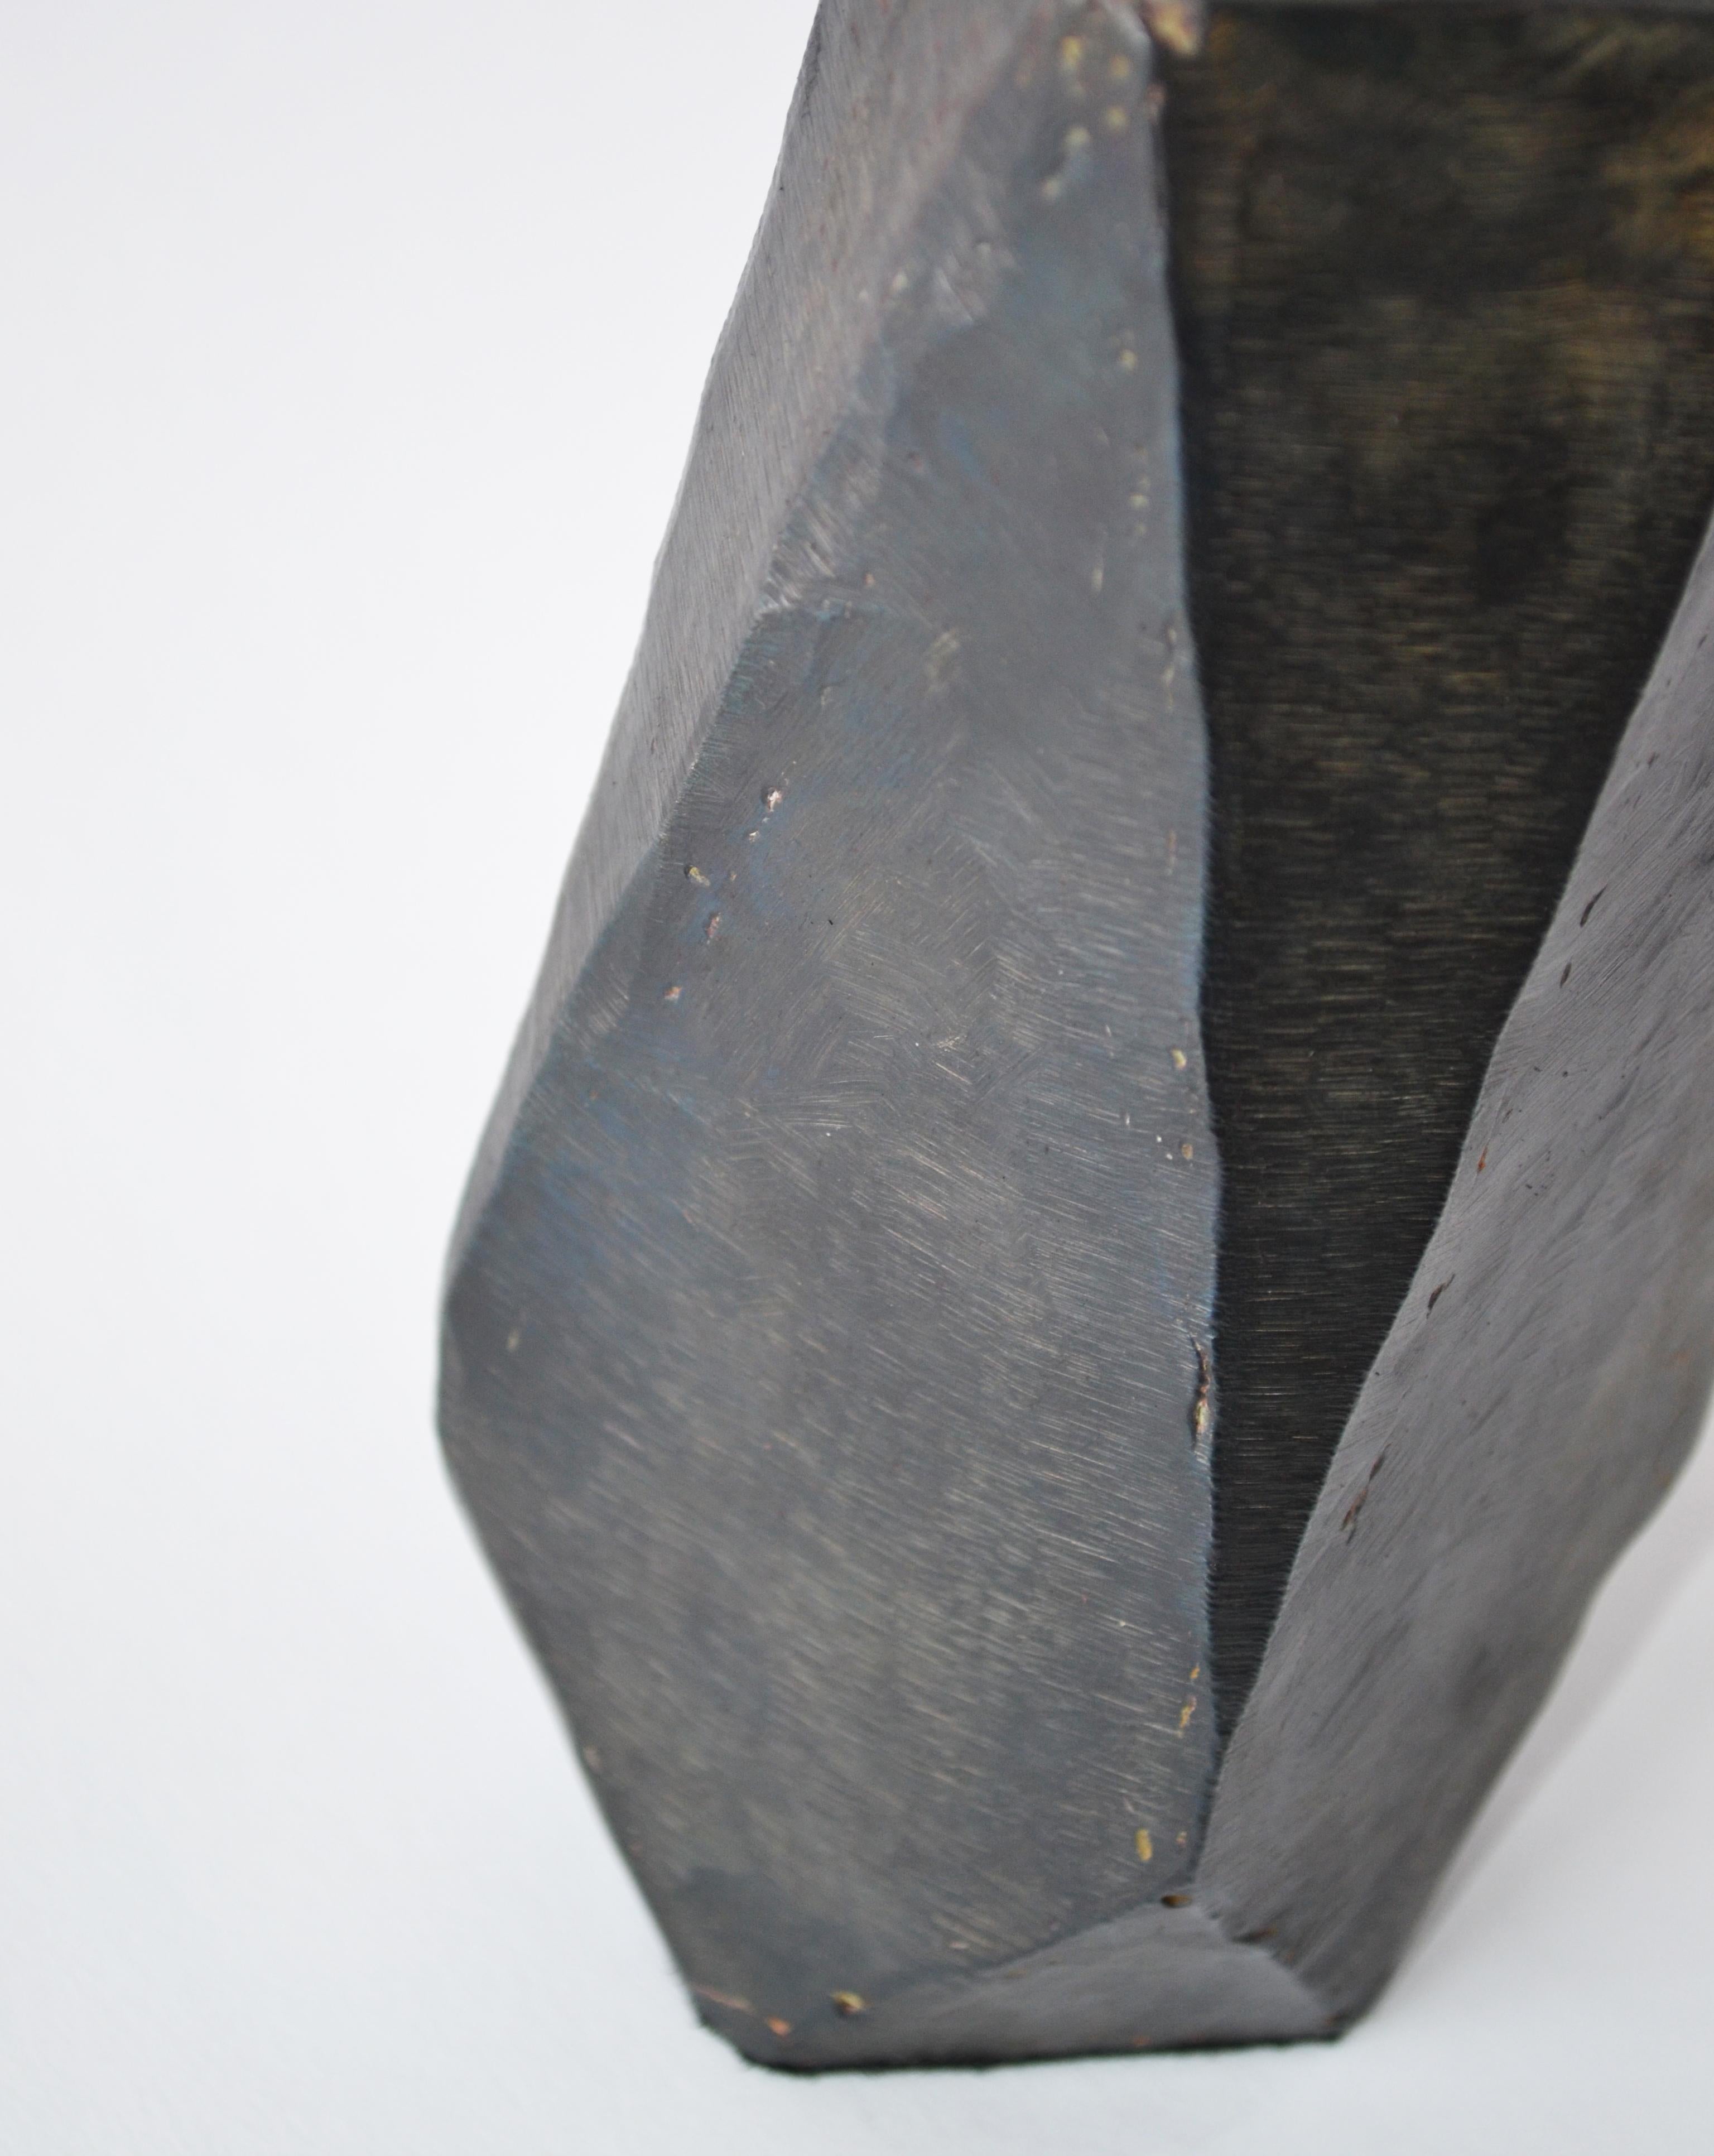 Geometric Vessel Sculpture Handmade Blackened and Waxed Iron In New Condition For Sale In Bronx, NY